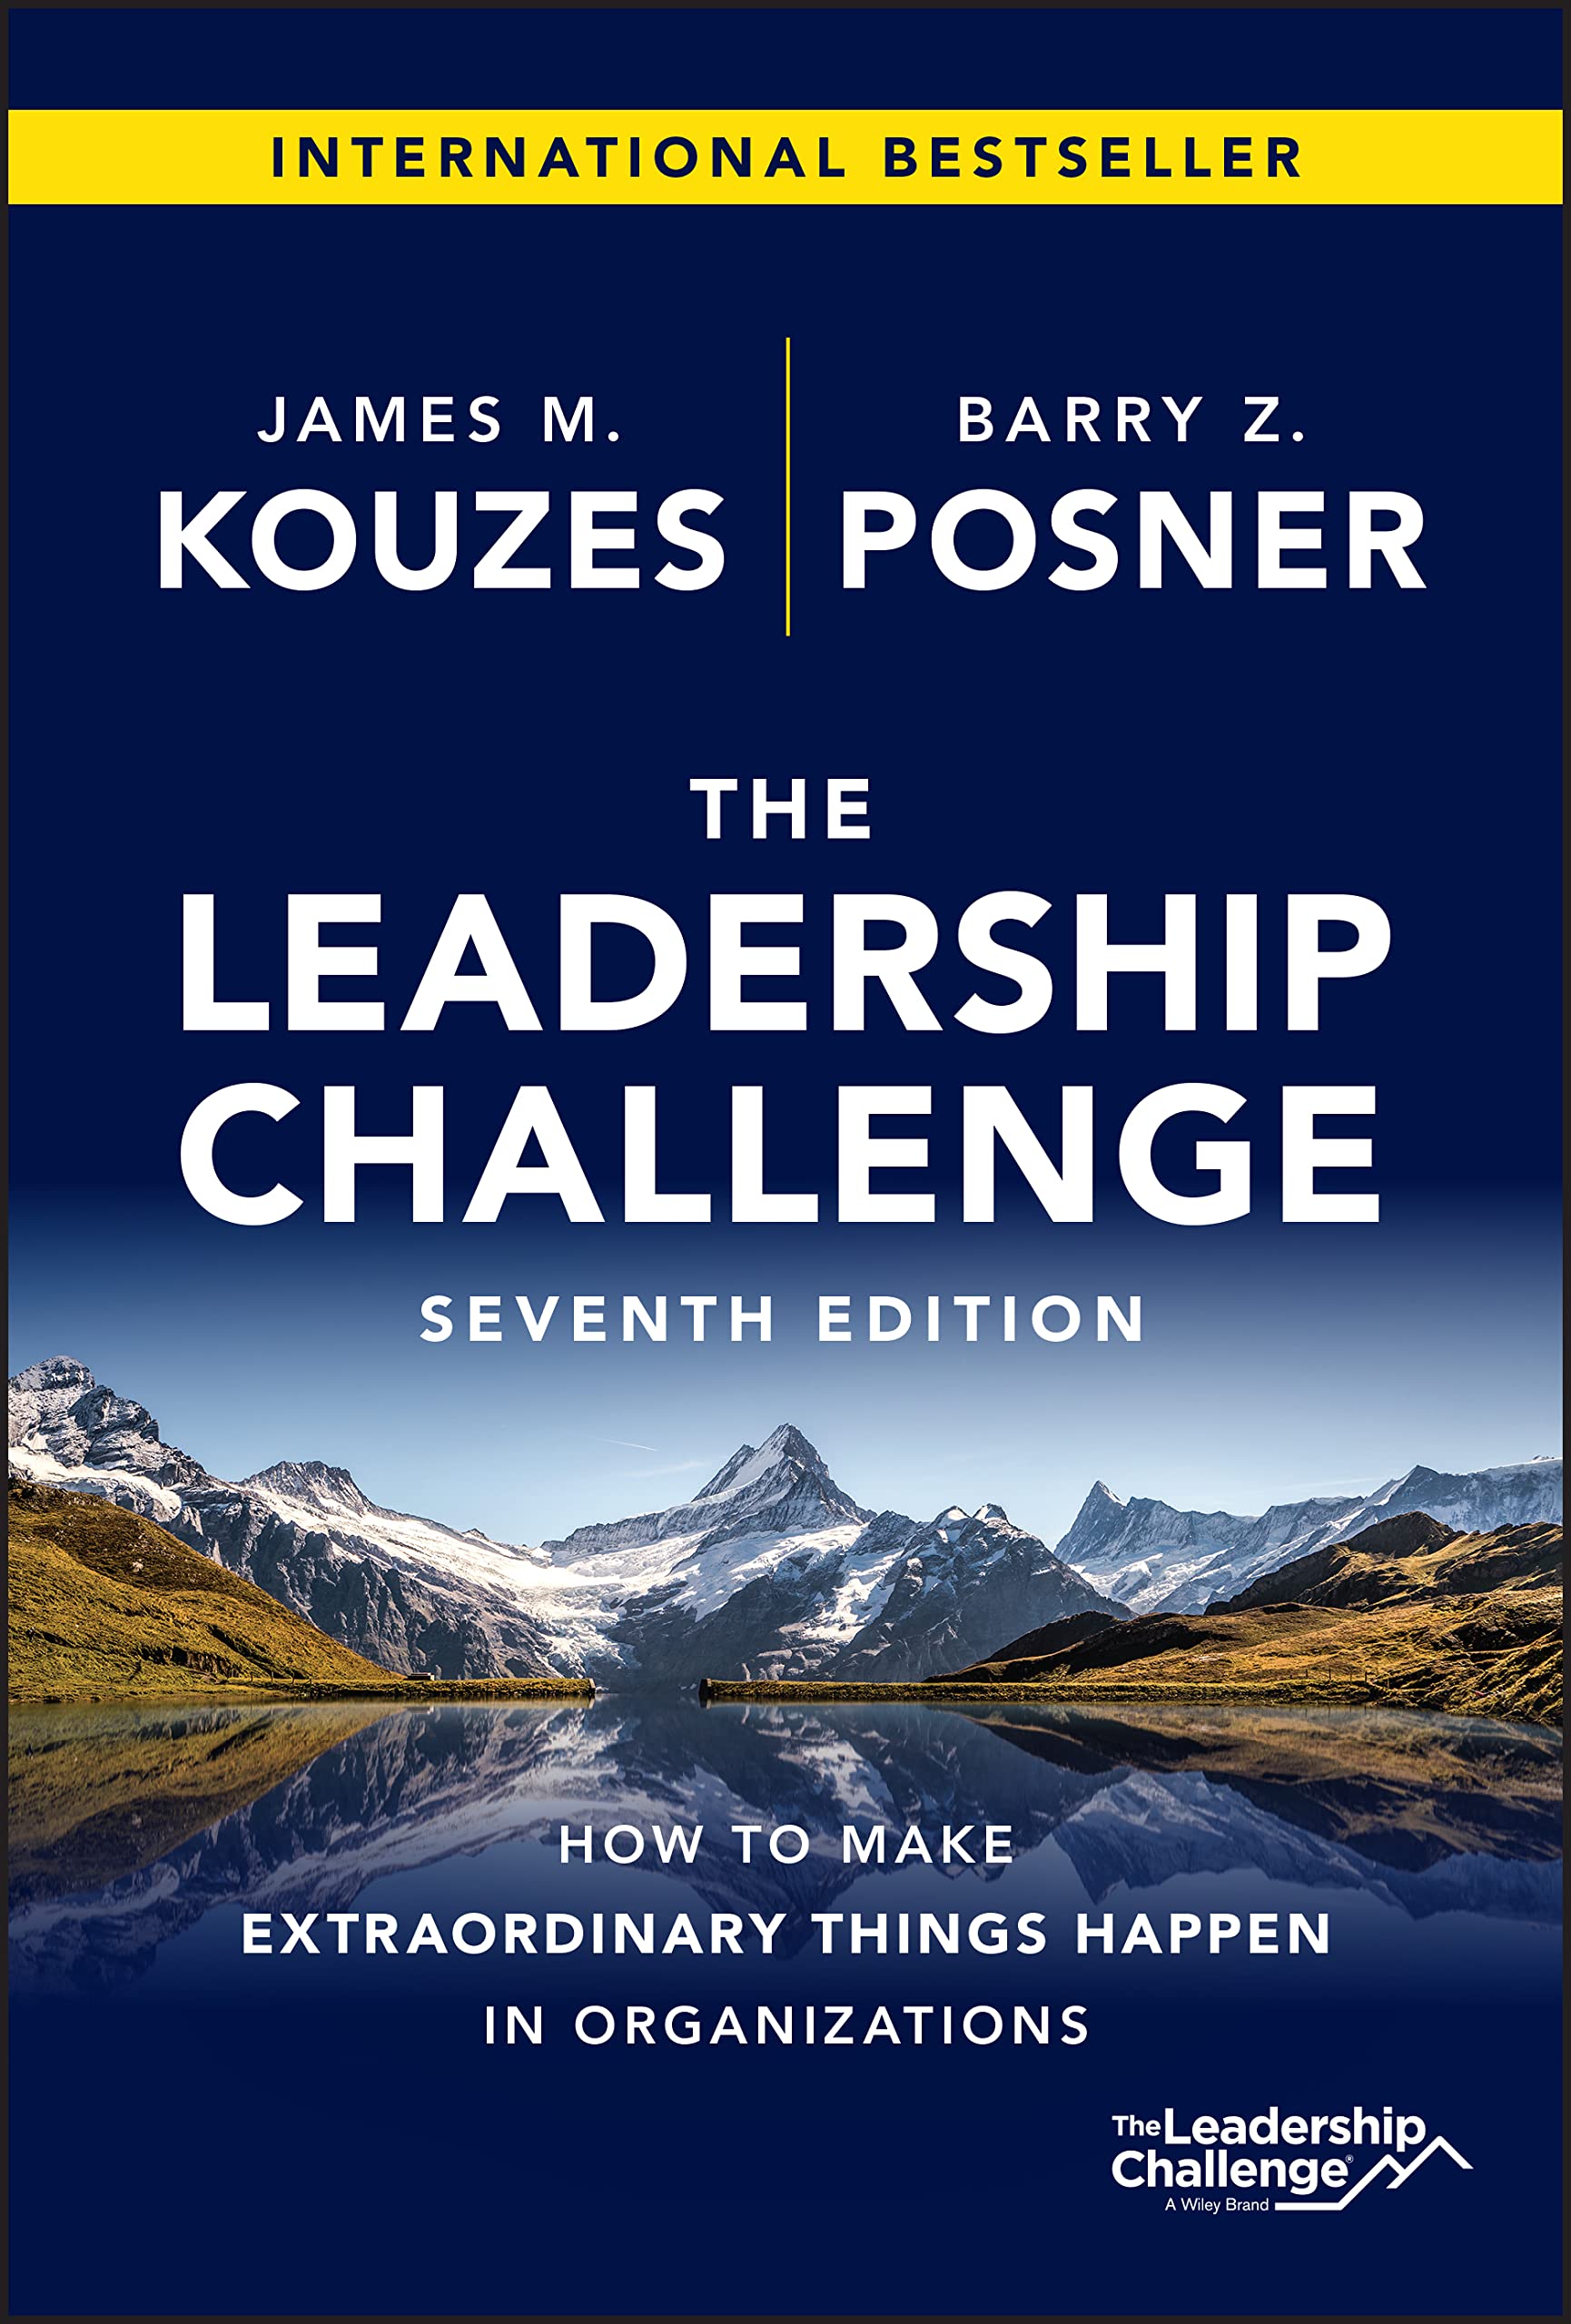 The Leadership Challenge by Barry Posner and James Kouzes